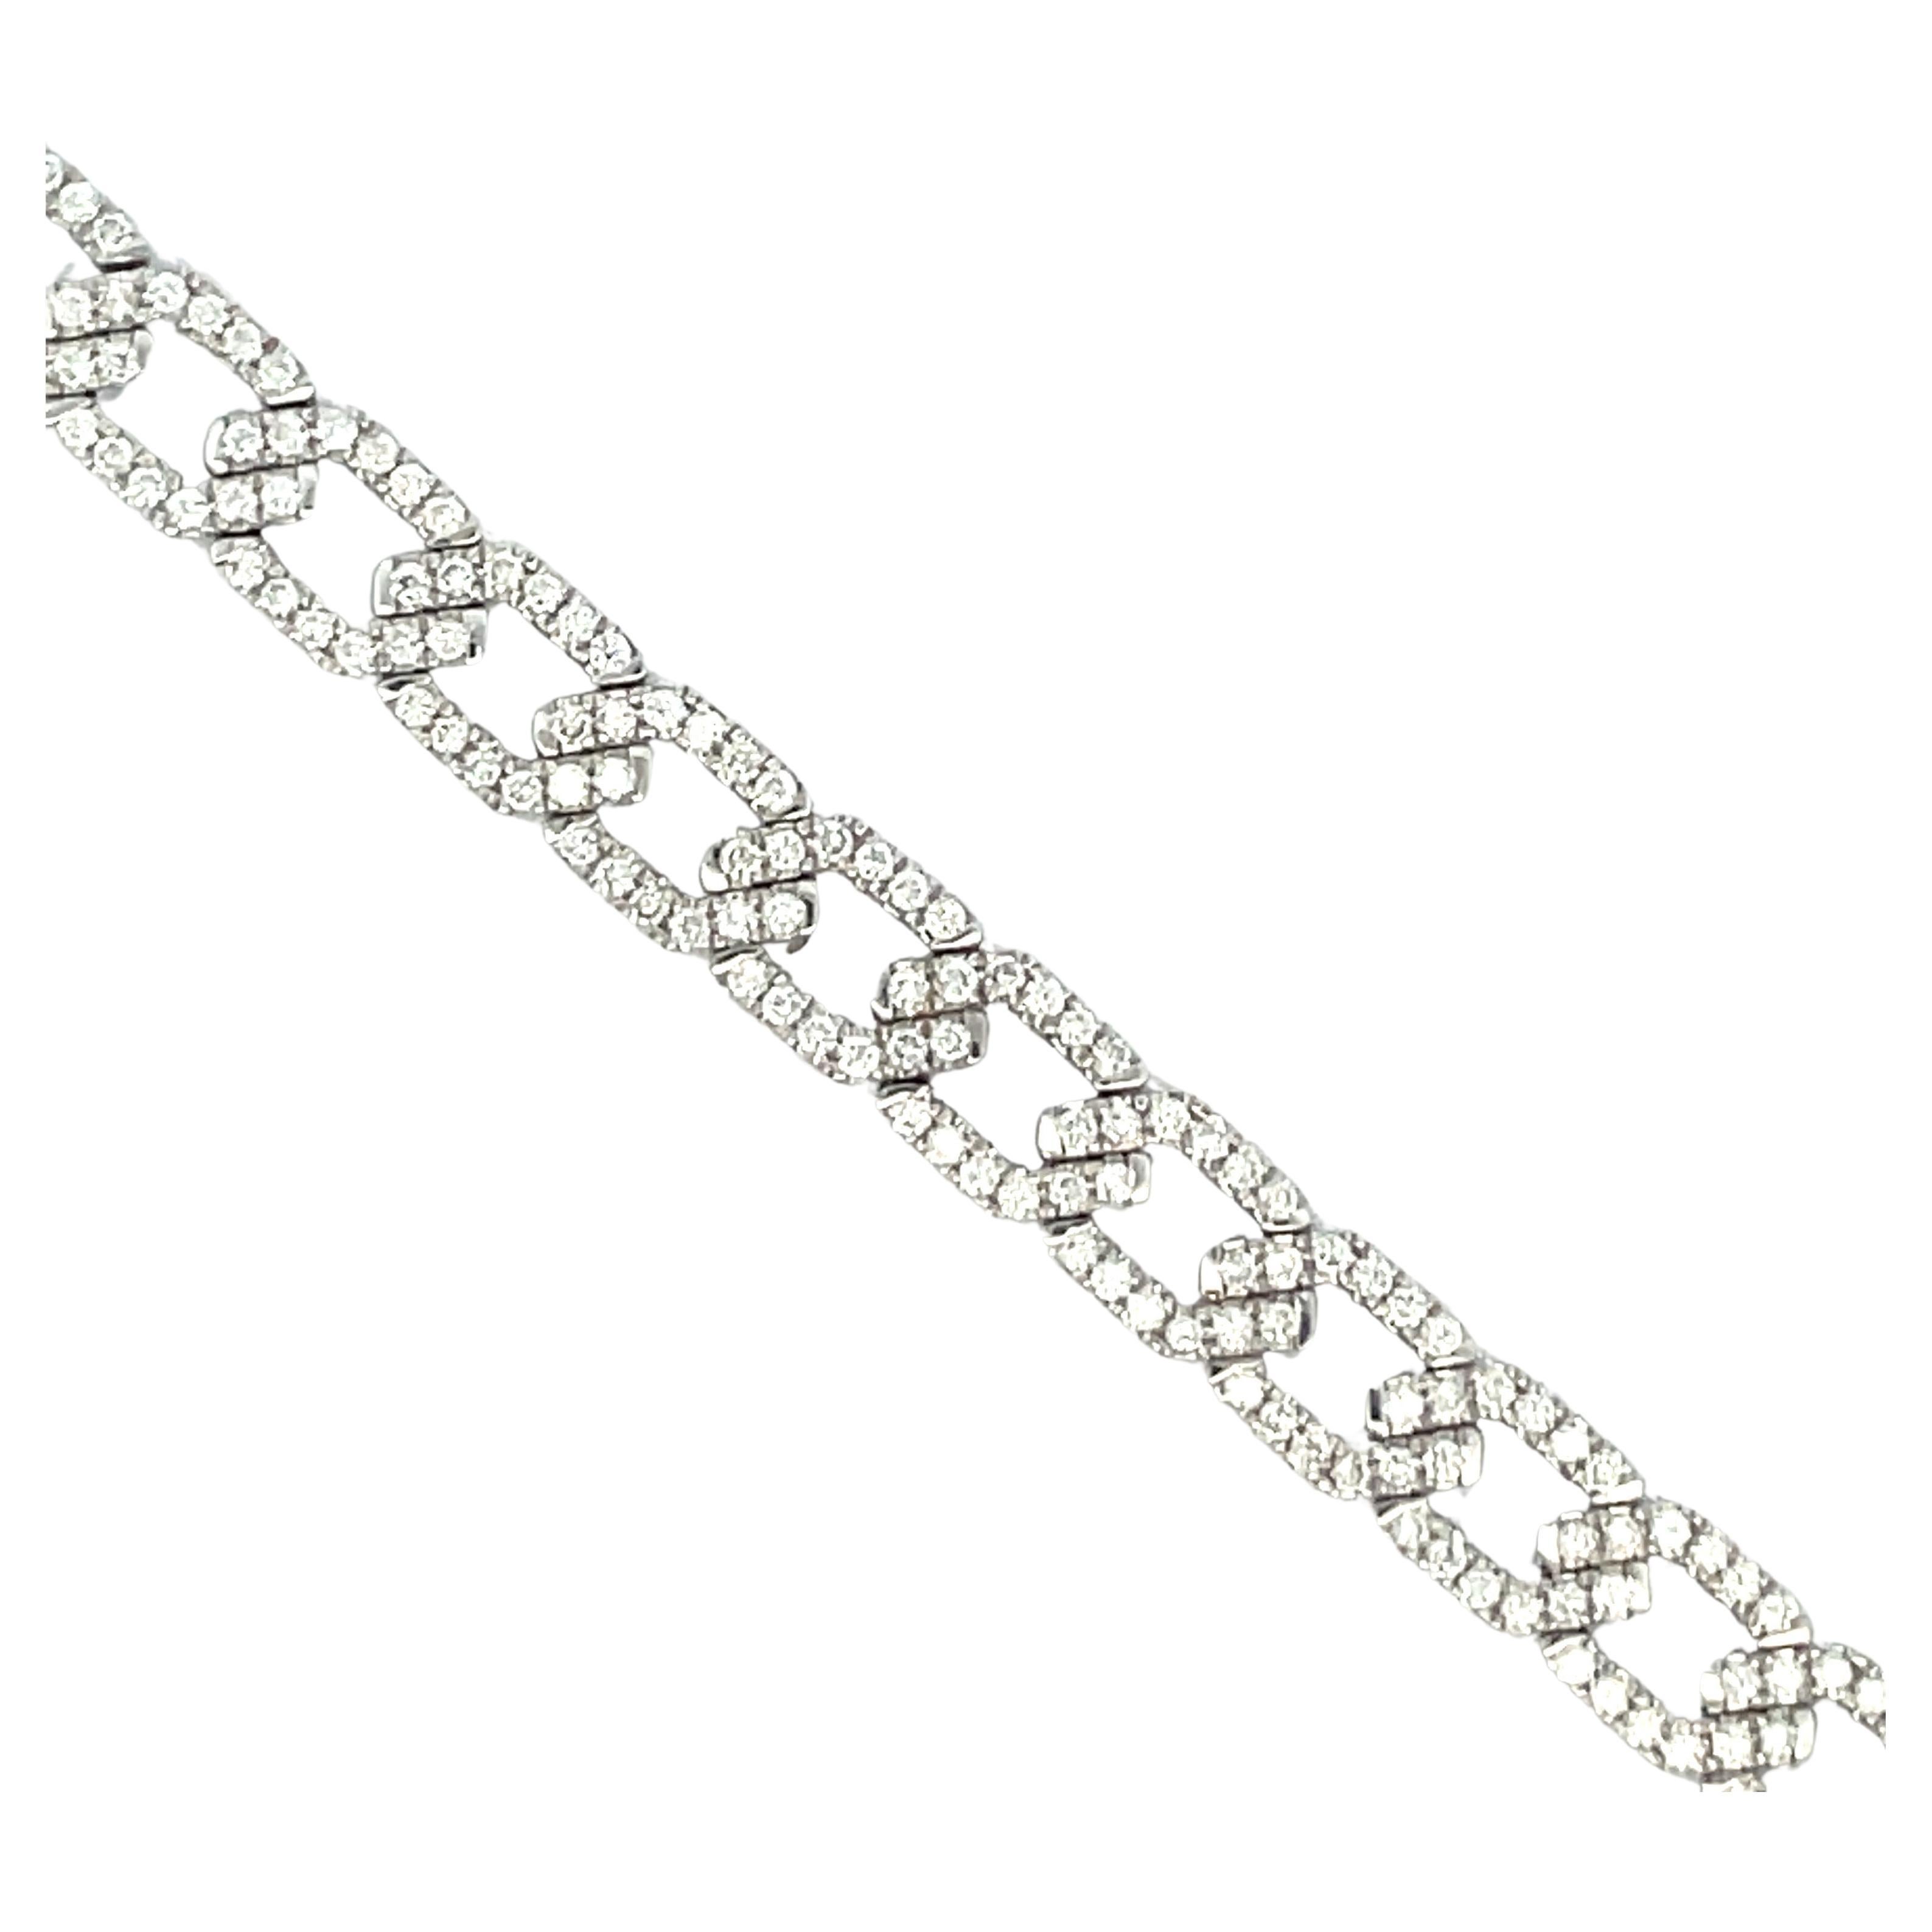 Diamond bracelet featuring Hexagon shape links featuring 304 diamonds weighing 2.83 carats in 14 Karat White Gold.
Color G-H
Clarity SI

Full of sparkle & brilliance!
More diamond link bracelets in stock, search Harbor Diamonds